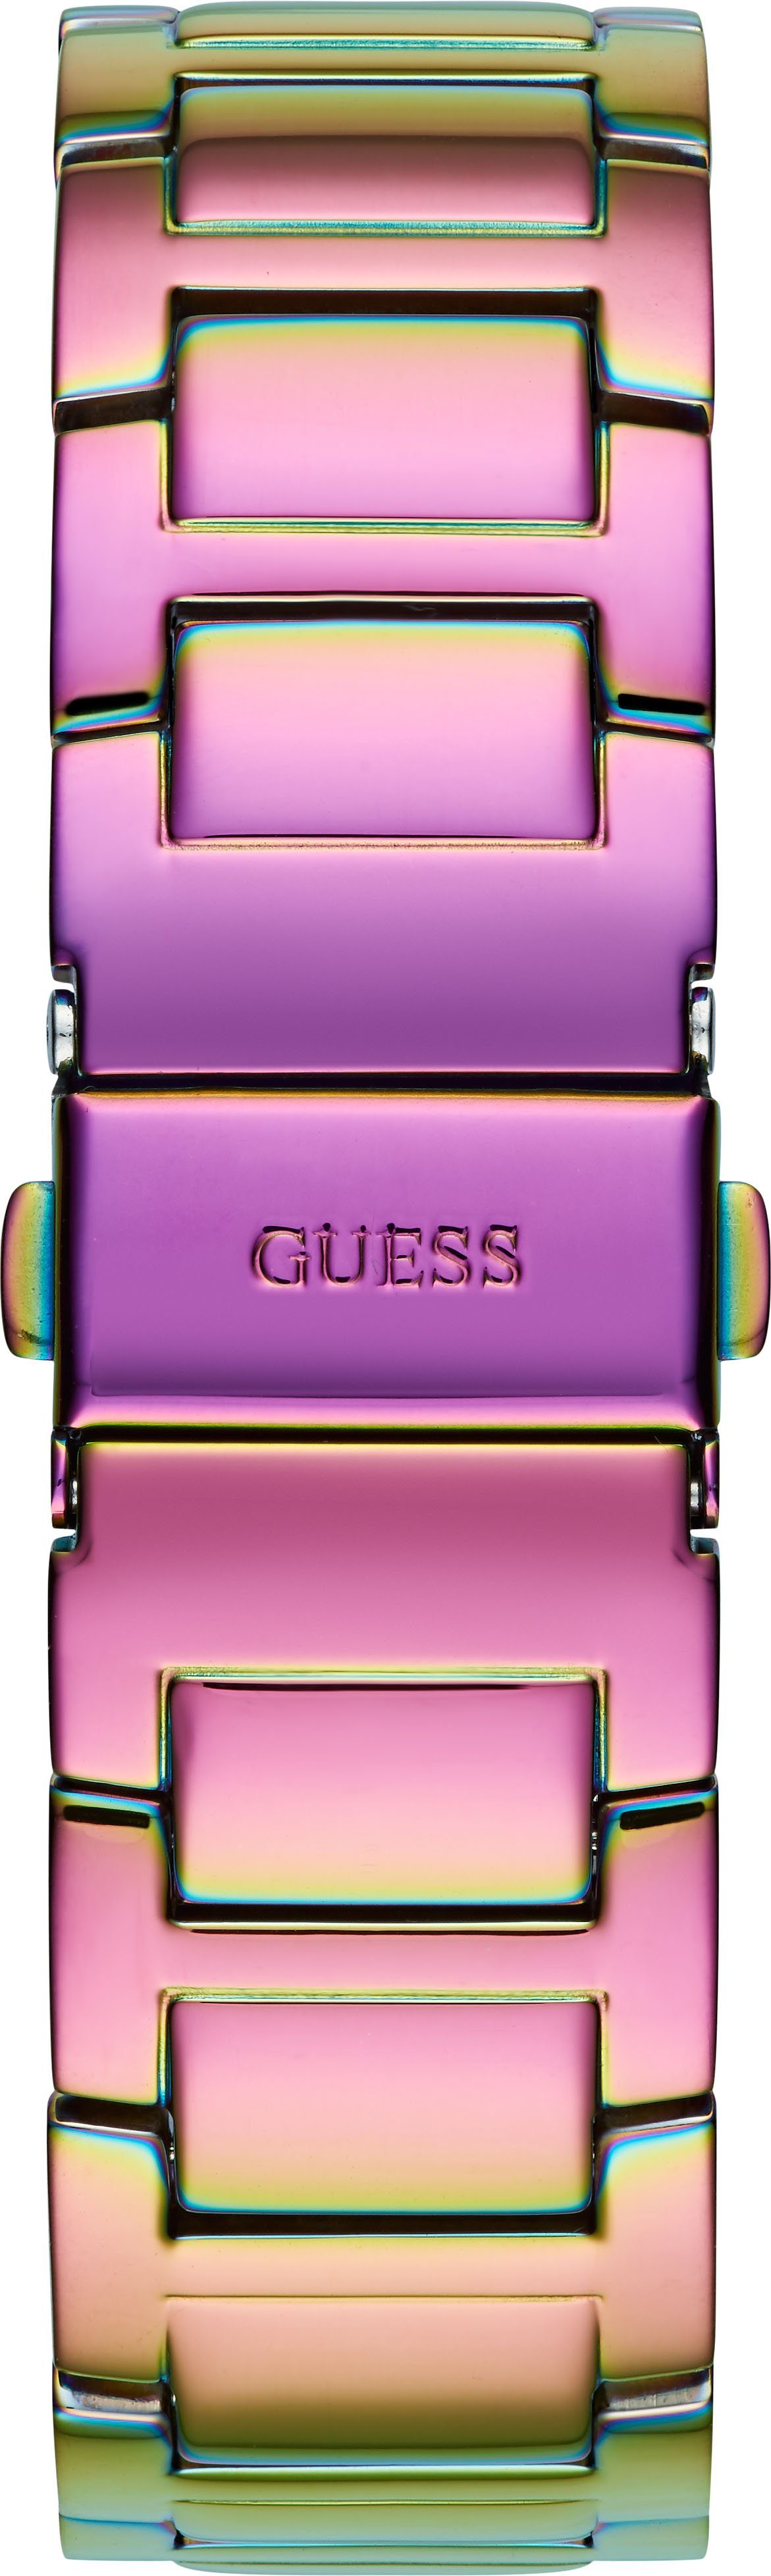 Guess Multifunktionsuhr LADY FRONTIER, GW0044L1